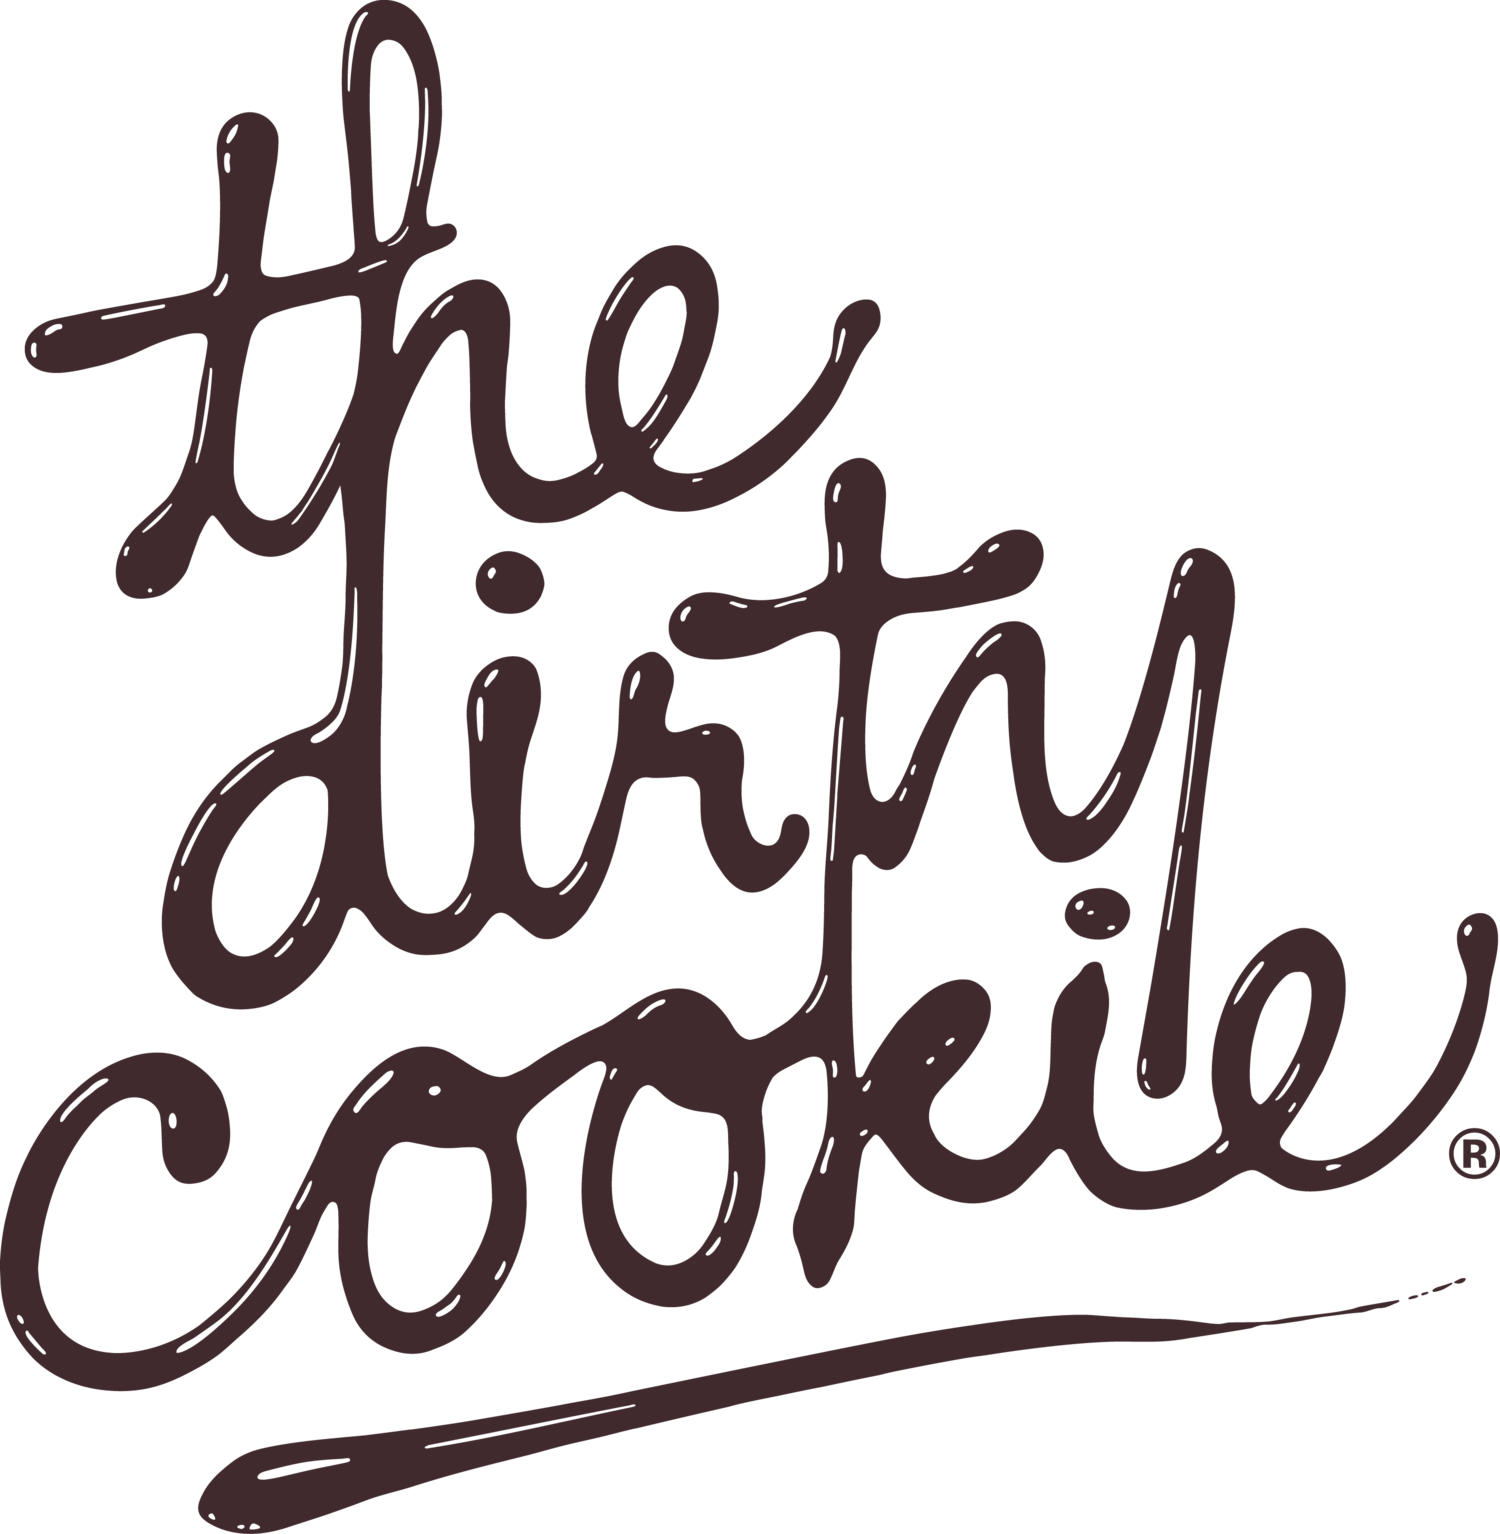 The Dirty Cookie